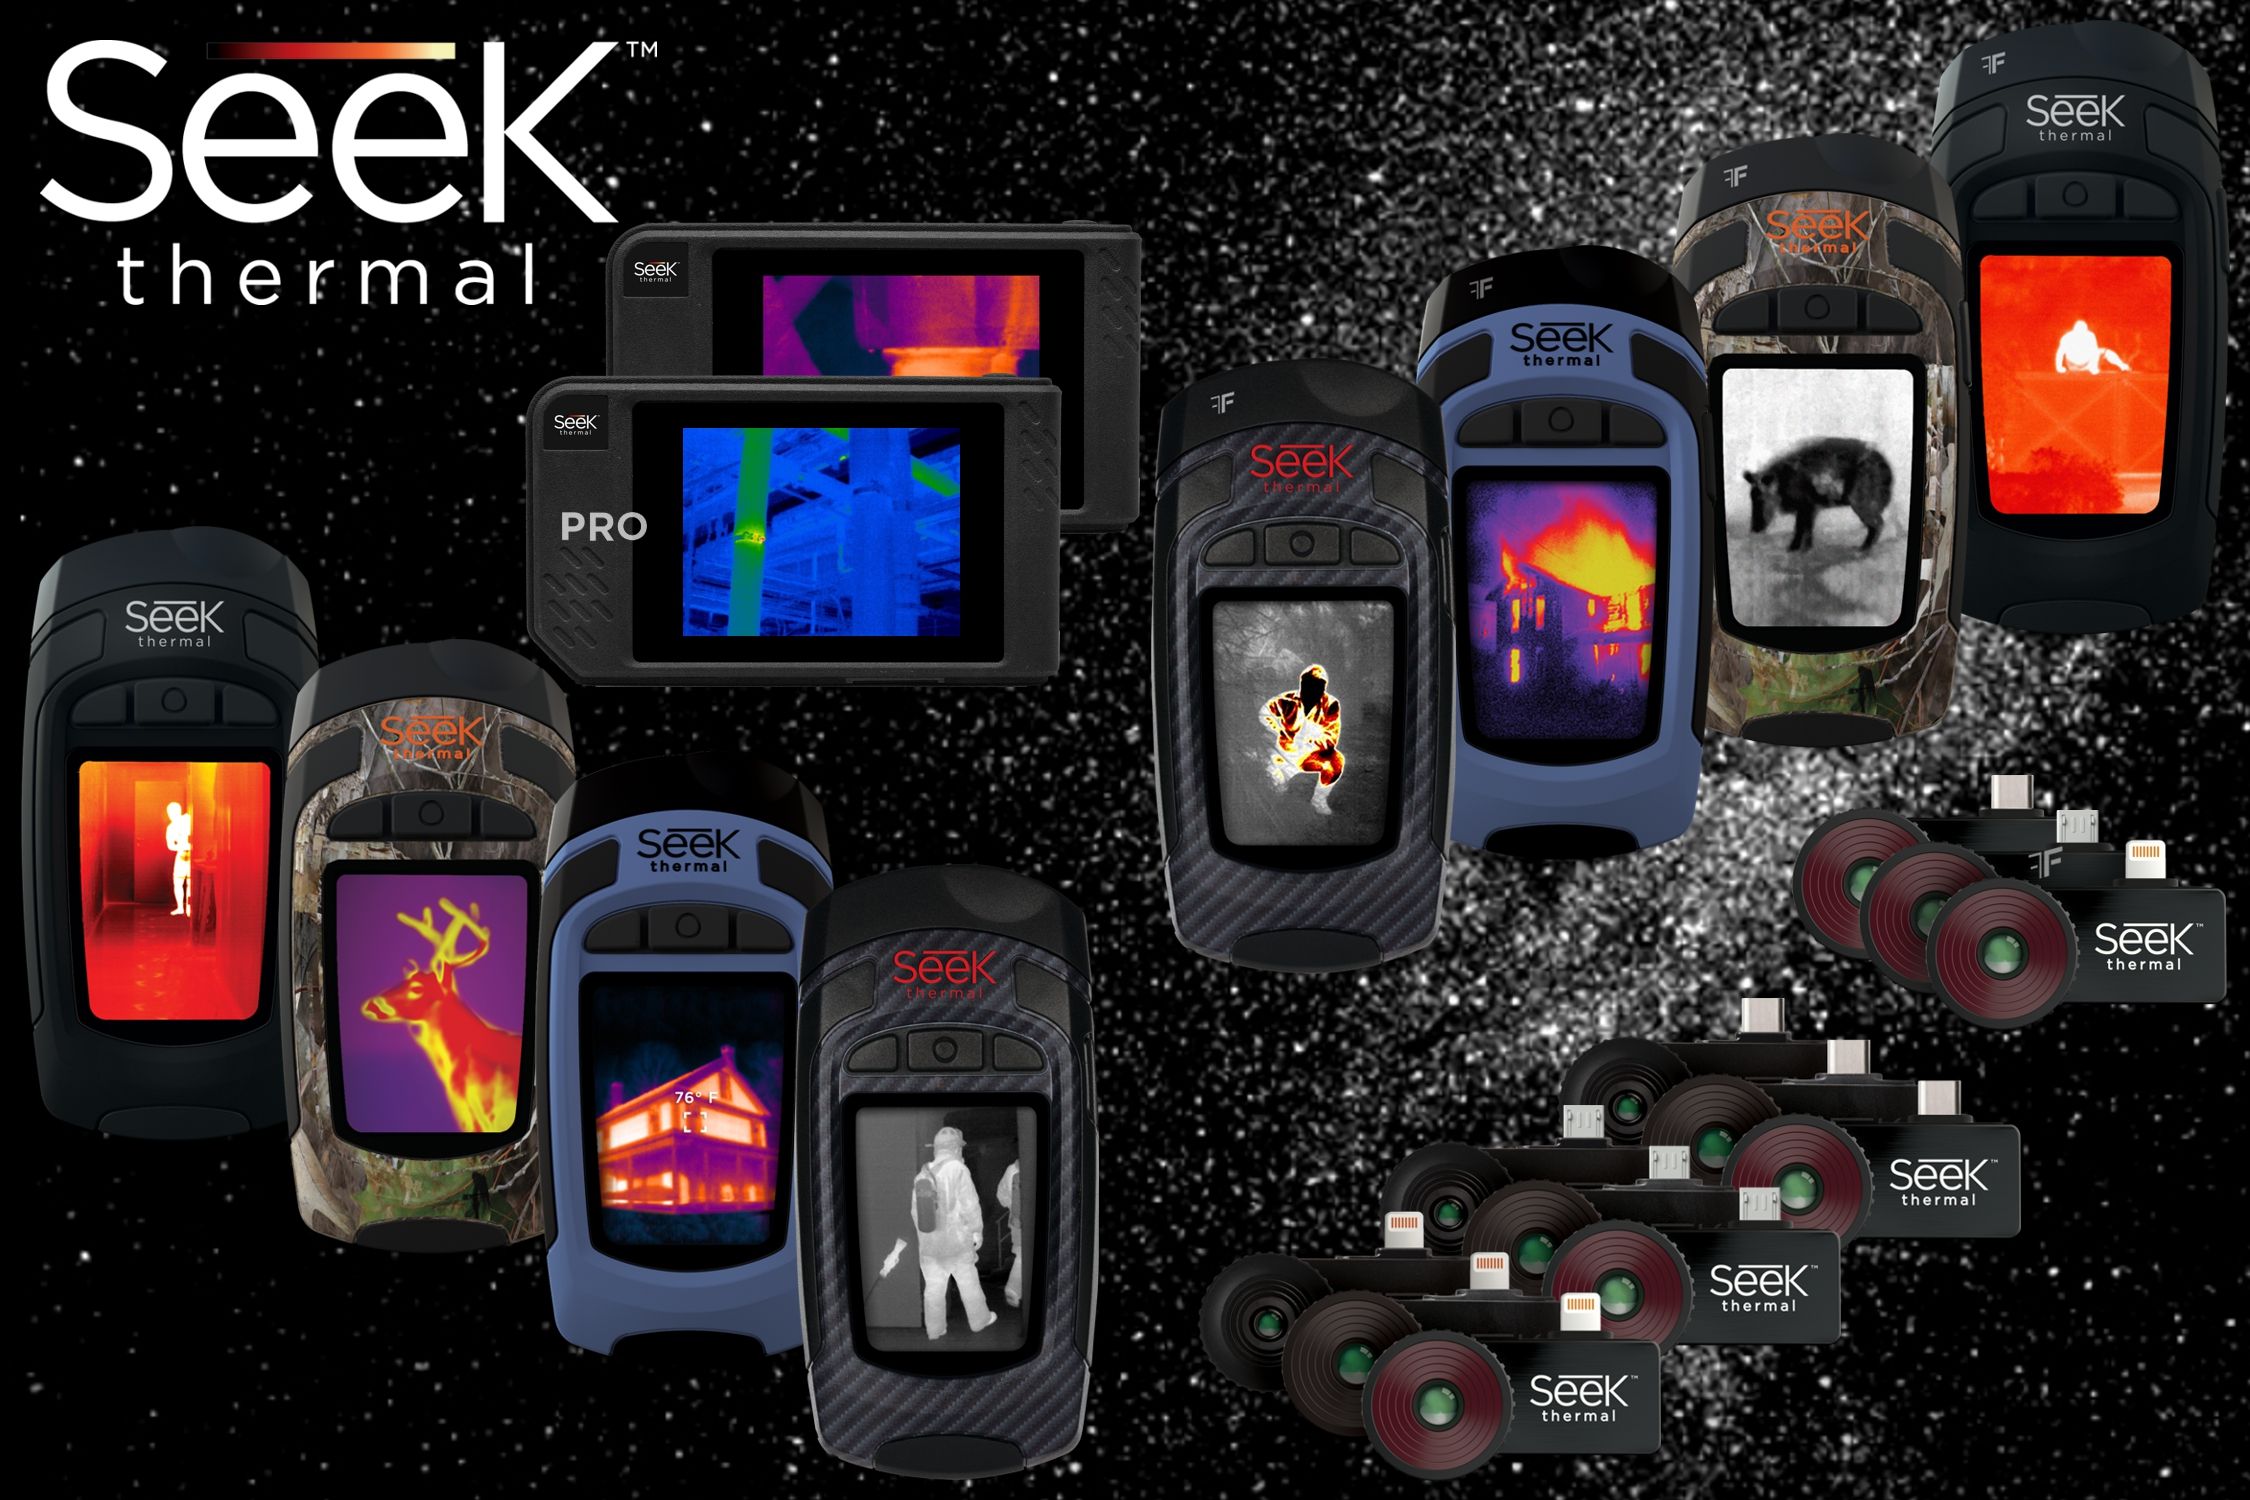 Seek Thermal Compact Android micro USB Thermal imaging camera UW-EAA_16